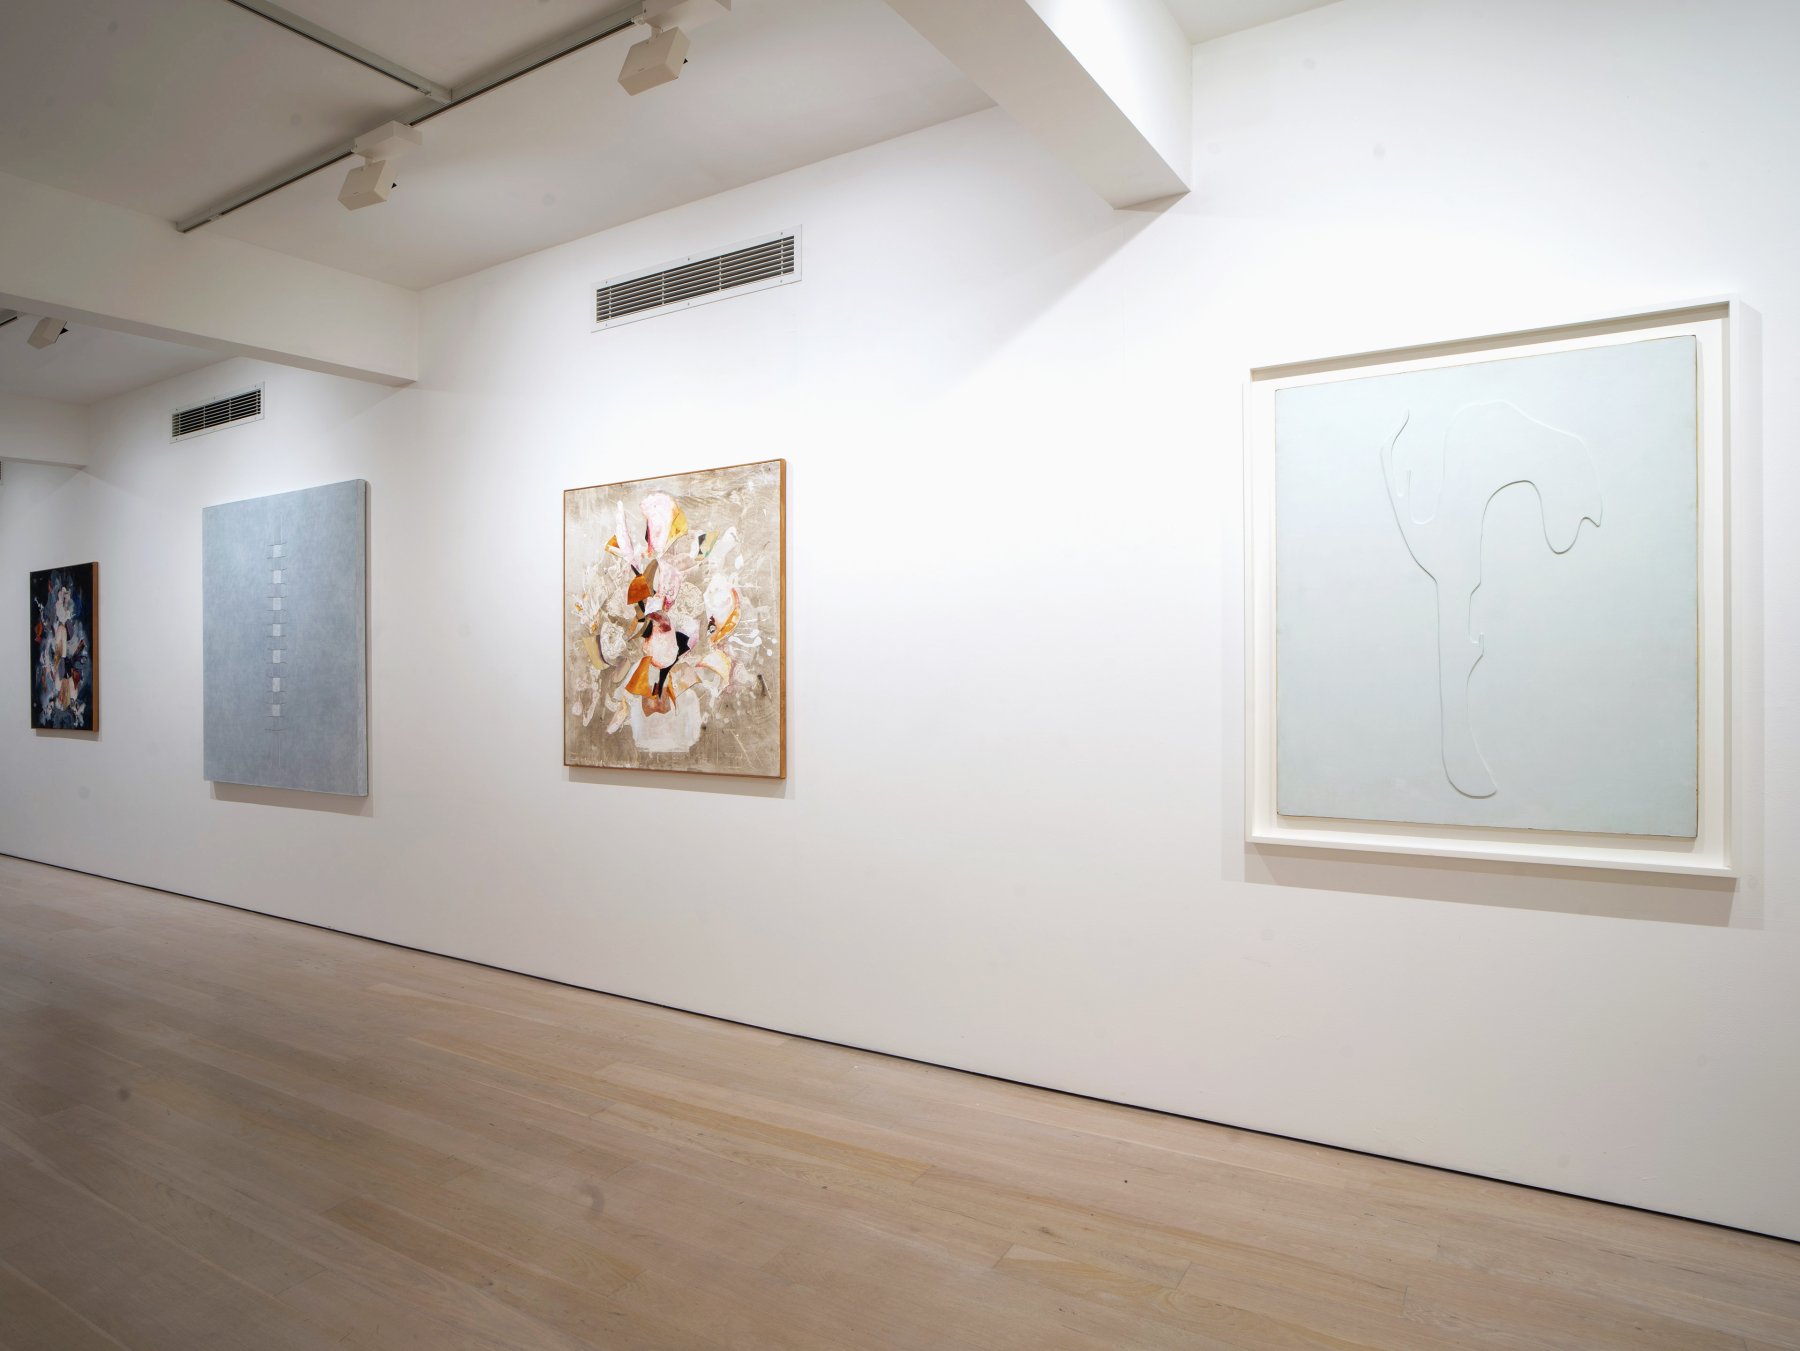 Installation image for Women in the Abstract, at Annely Juda Fine Art